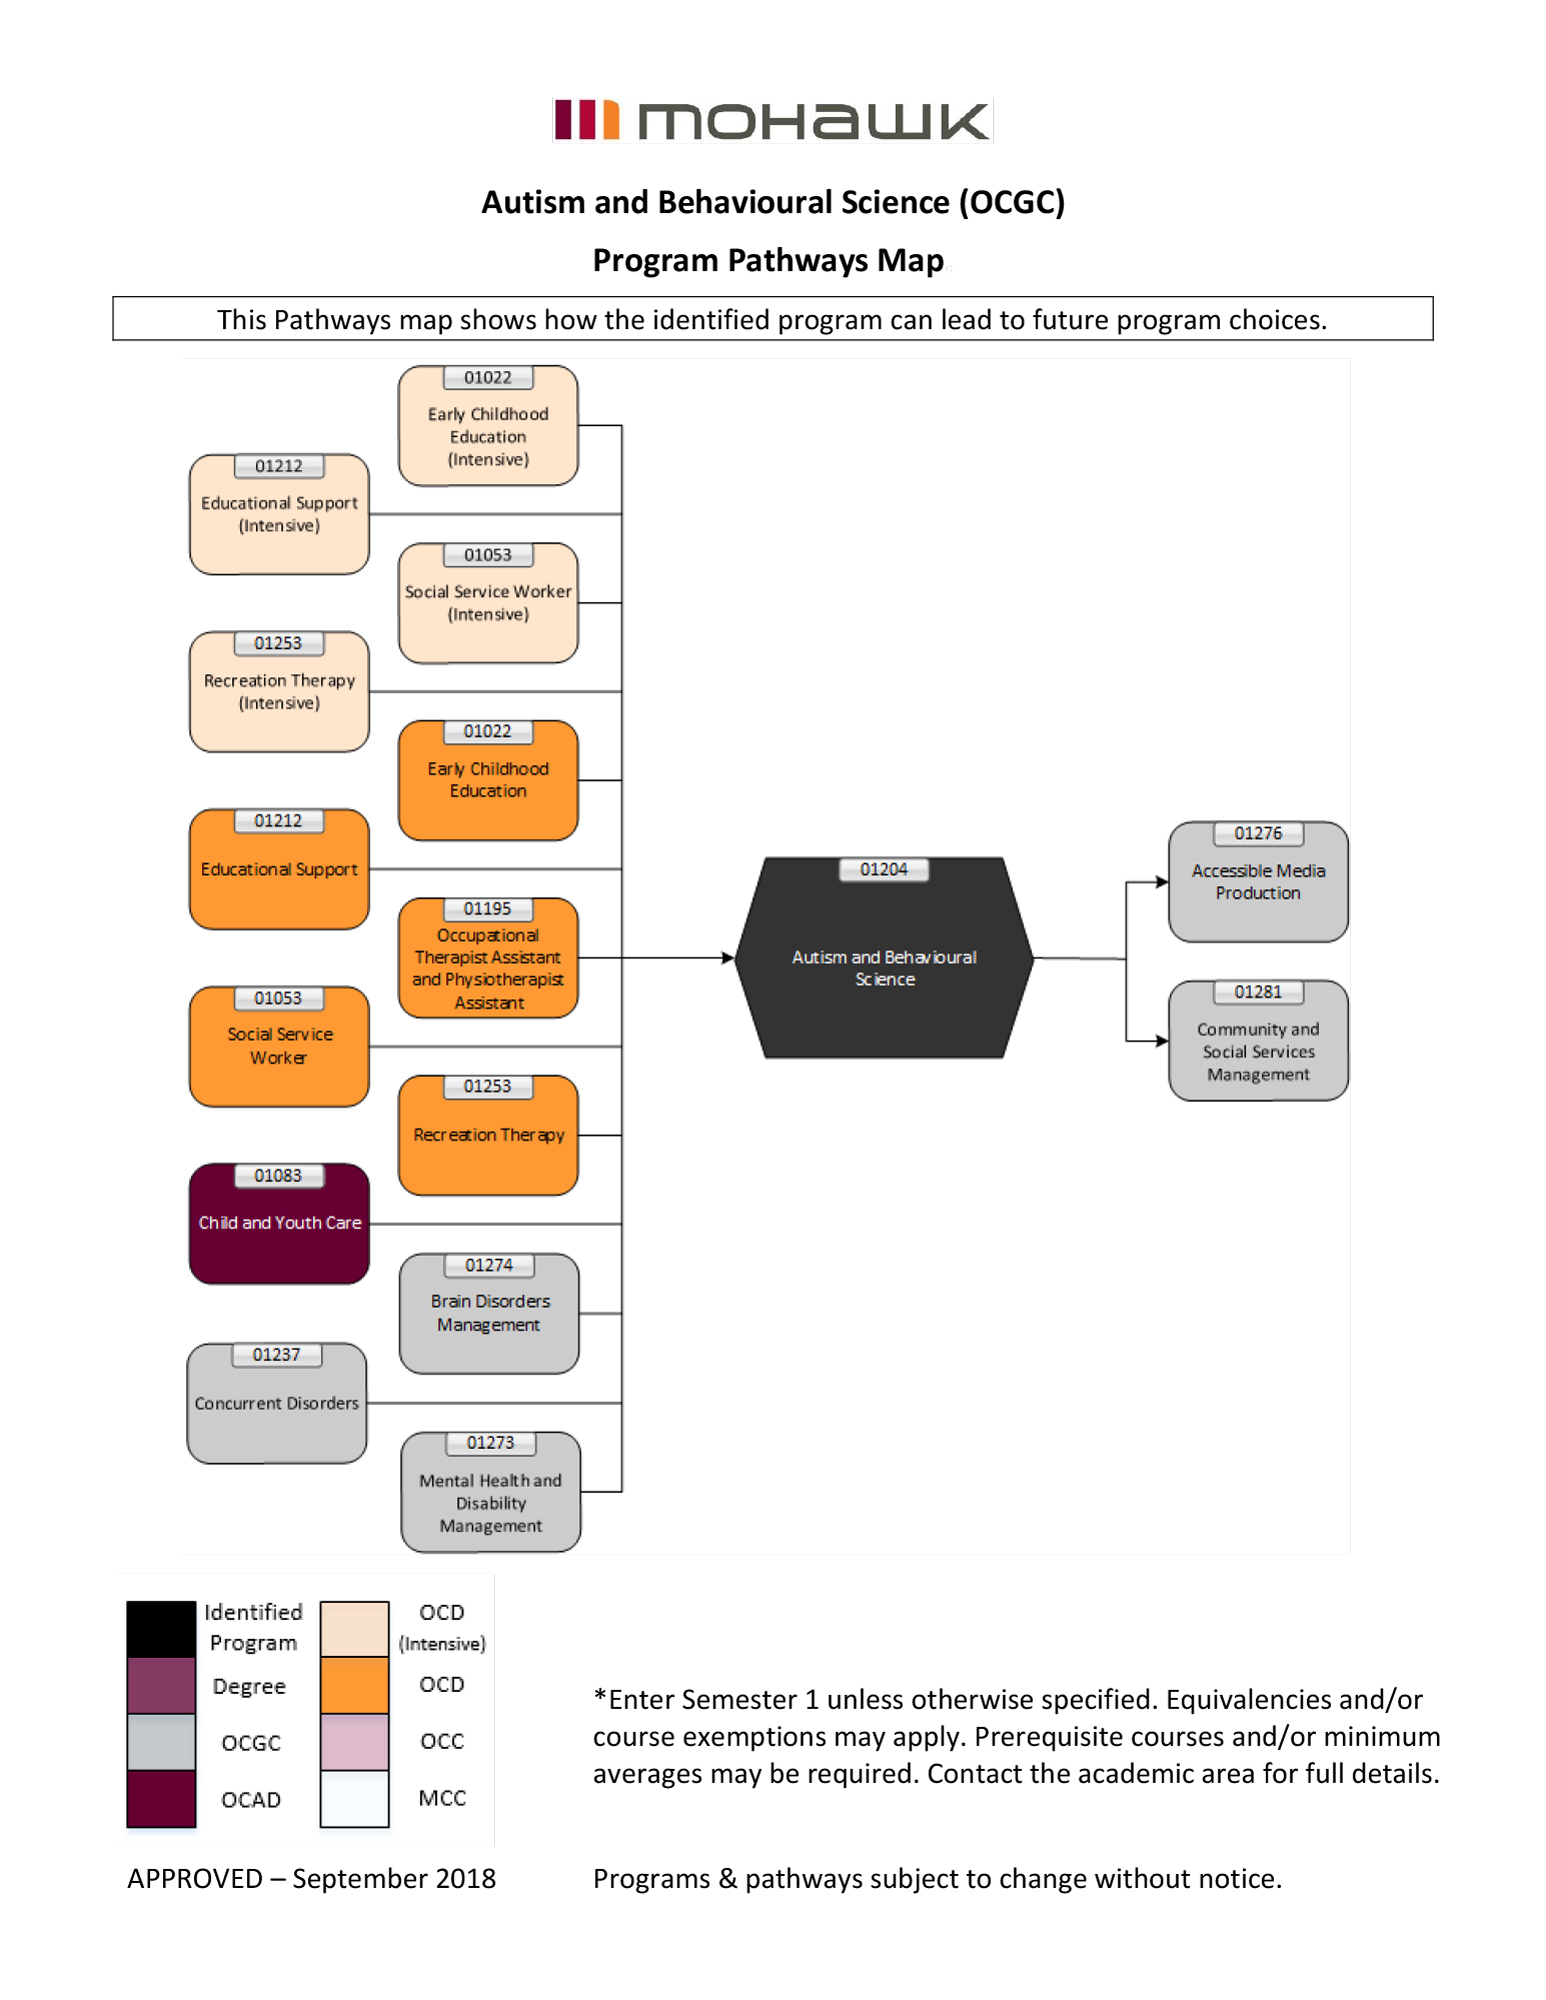 Autism and Behavioural Science pathways map